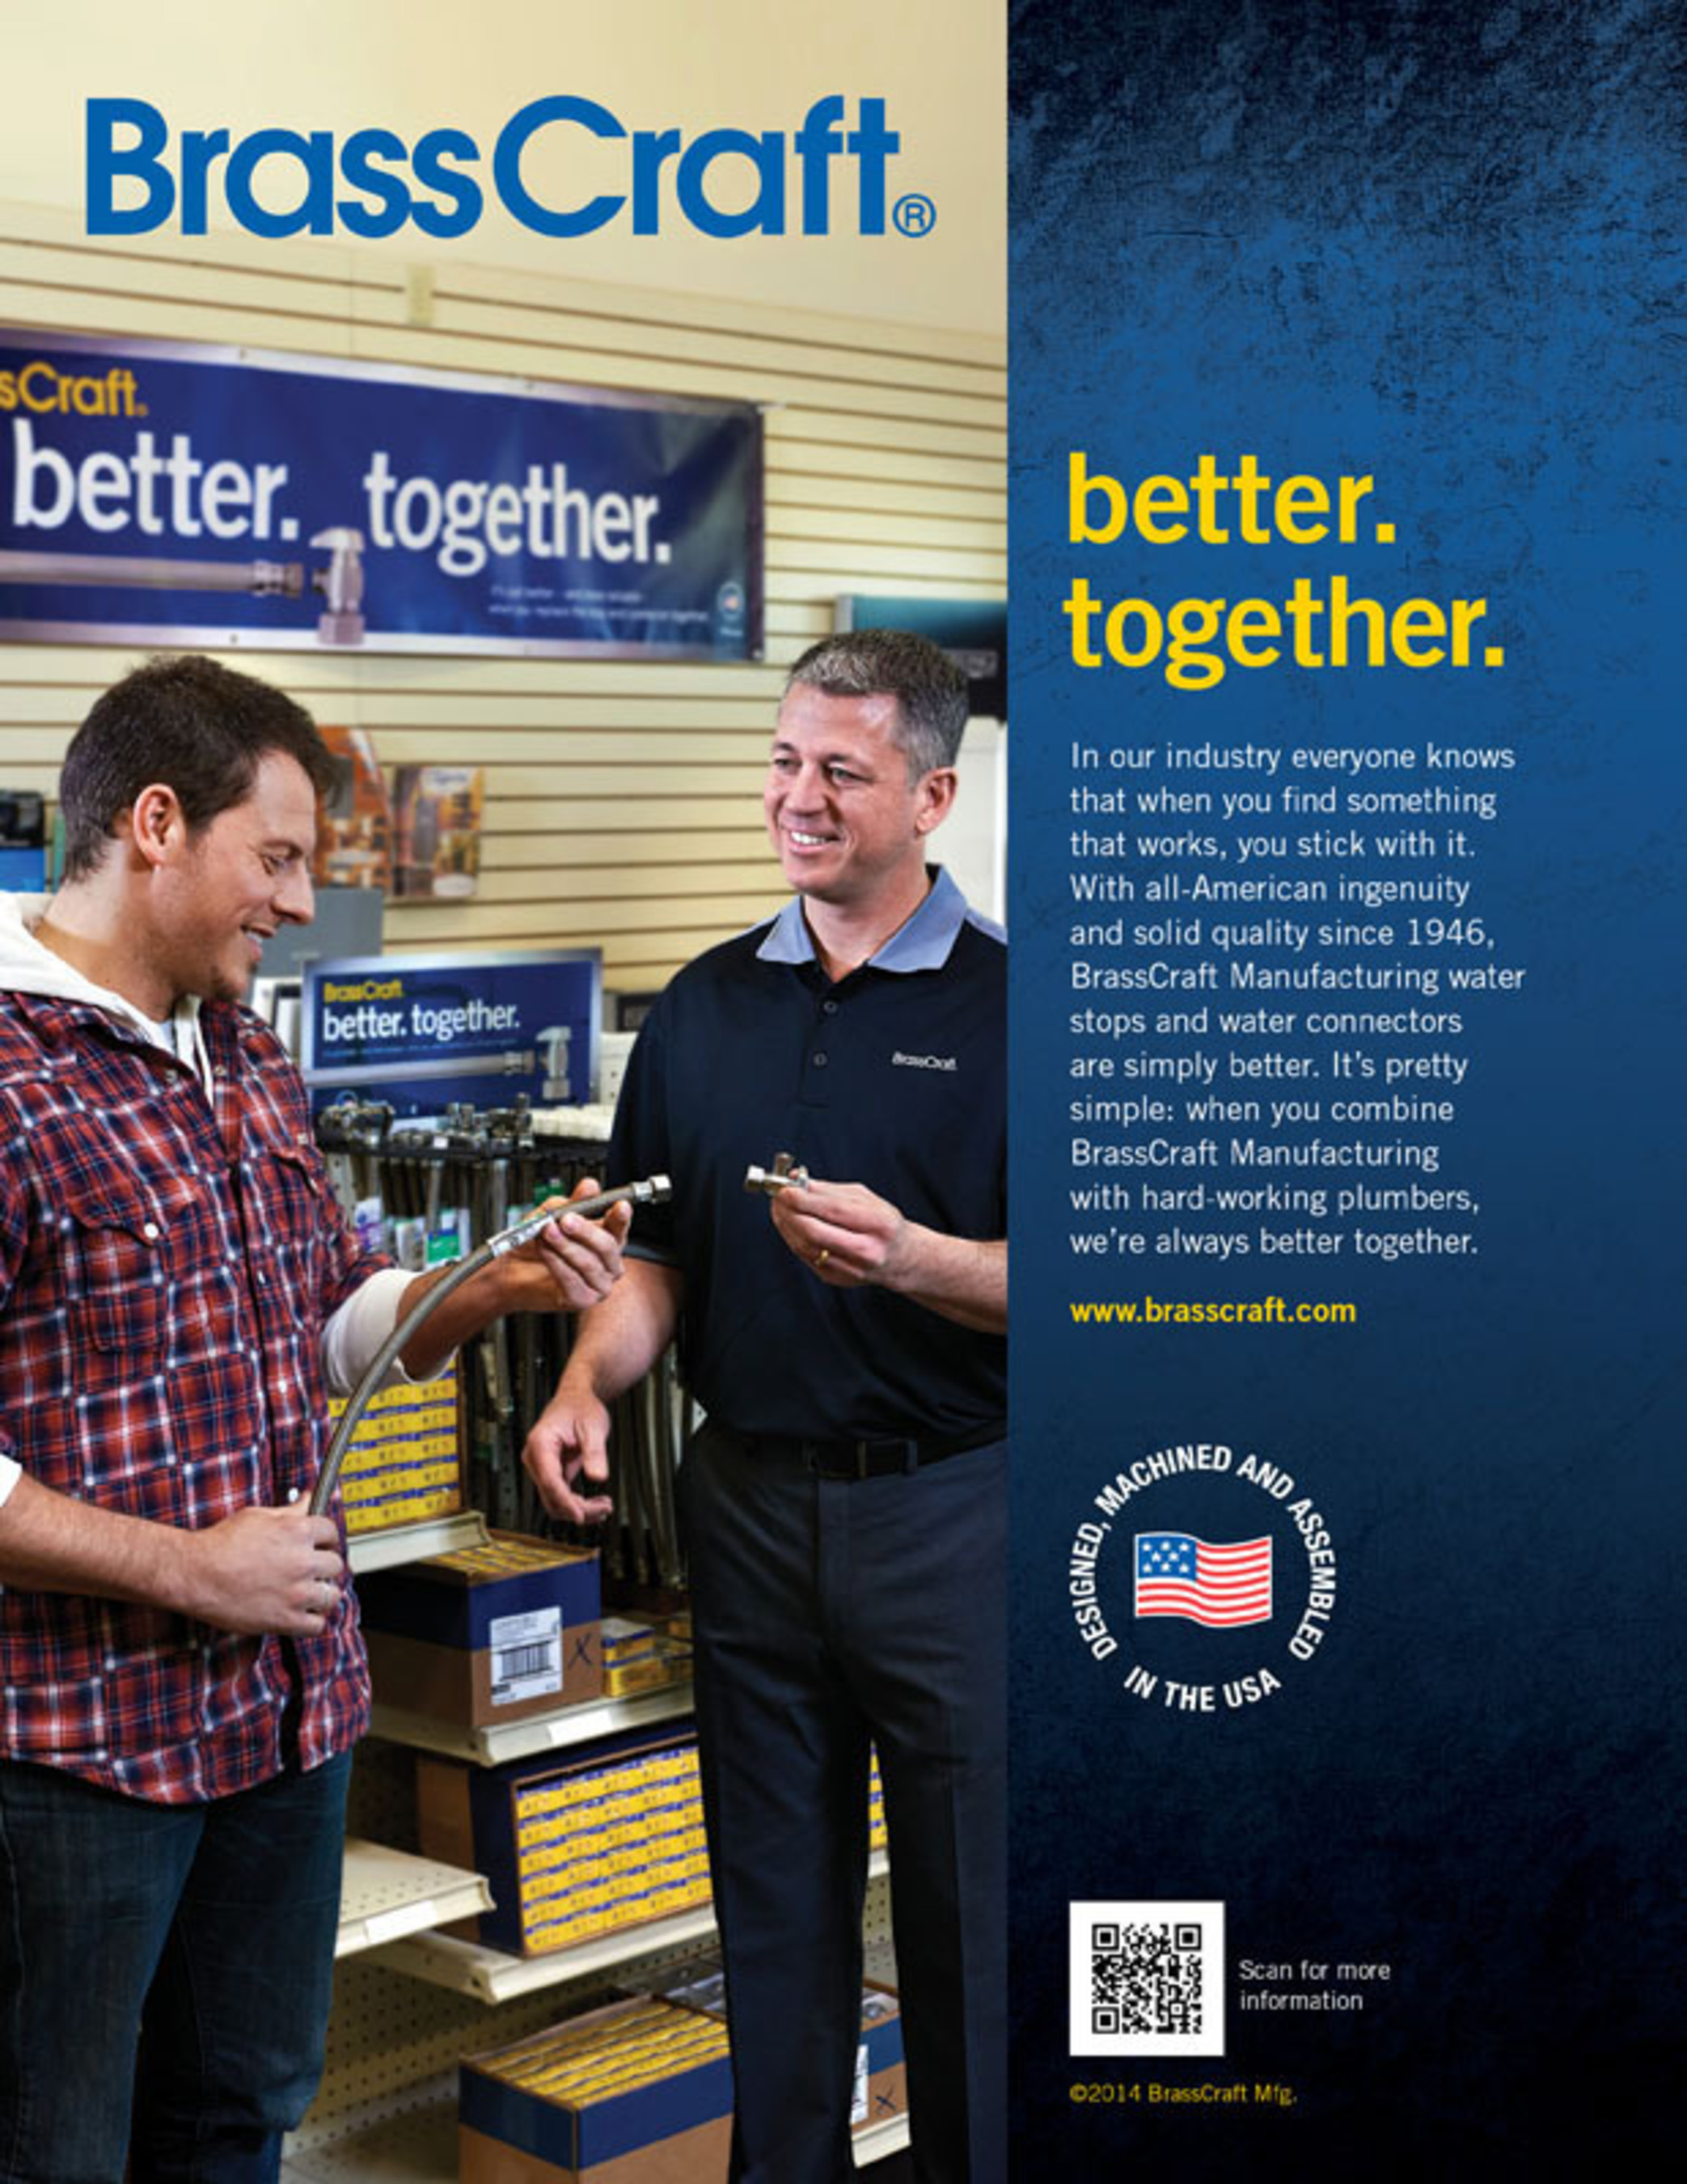 BrassCraft Manufacturing Introduces New B2B Ad Campaign That Puts the Spotlight on the Importance of Great Relationships. (PRNewsFoto/BrassCraft Manufacturing) (PRNewsFoto/BRASSCRAFT MANUFACTURING)